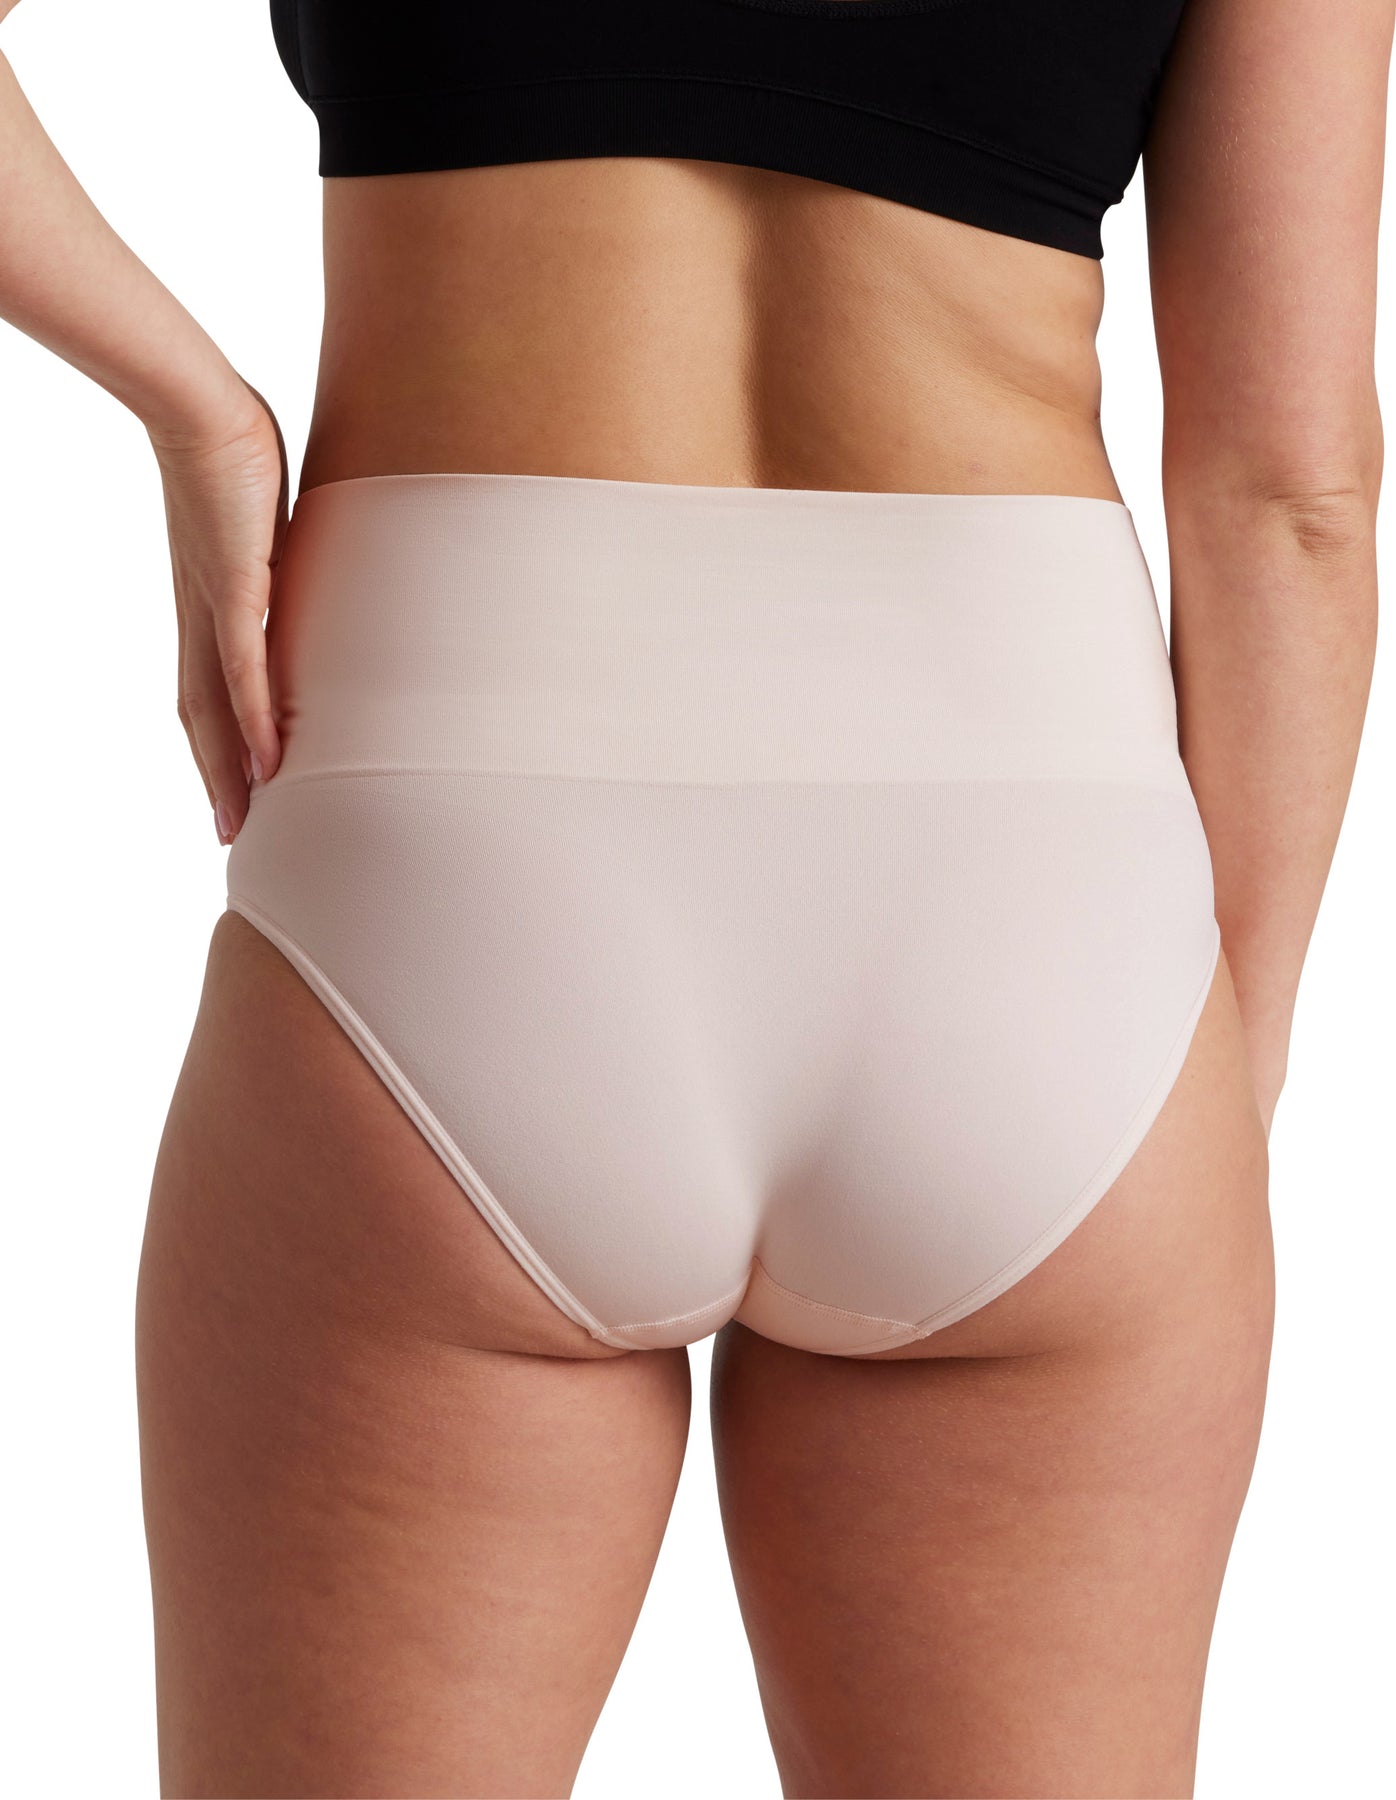 UK Tights on X: Save 30% Off Ambra Underwear - Selected Styles Ambra is  the number one stop for comfy, everyday undies. There's every brief shape  and bra style, cami vests, shaping